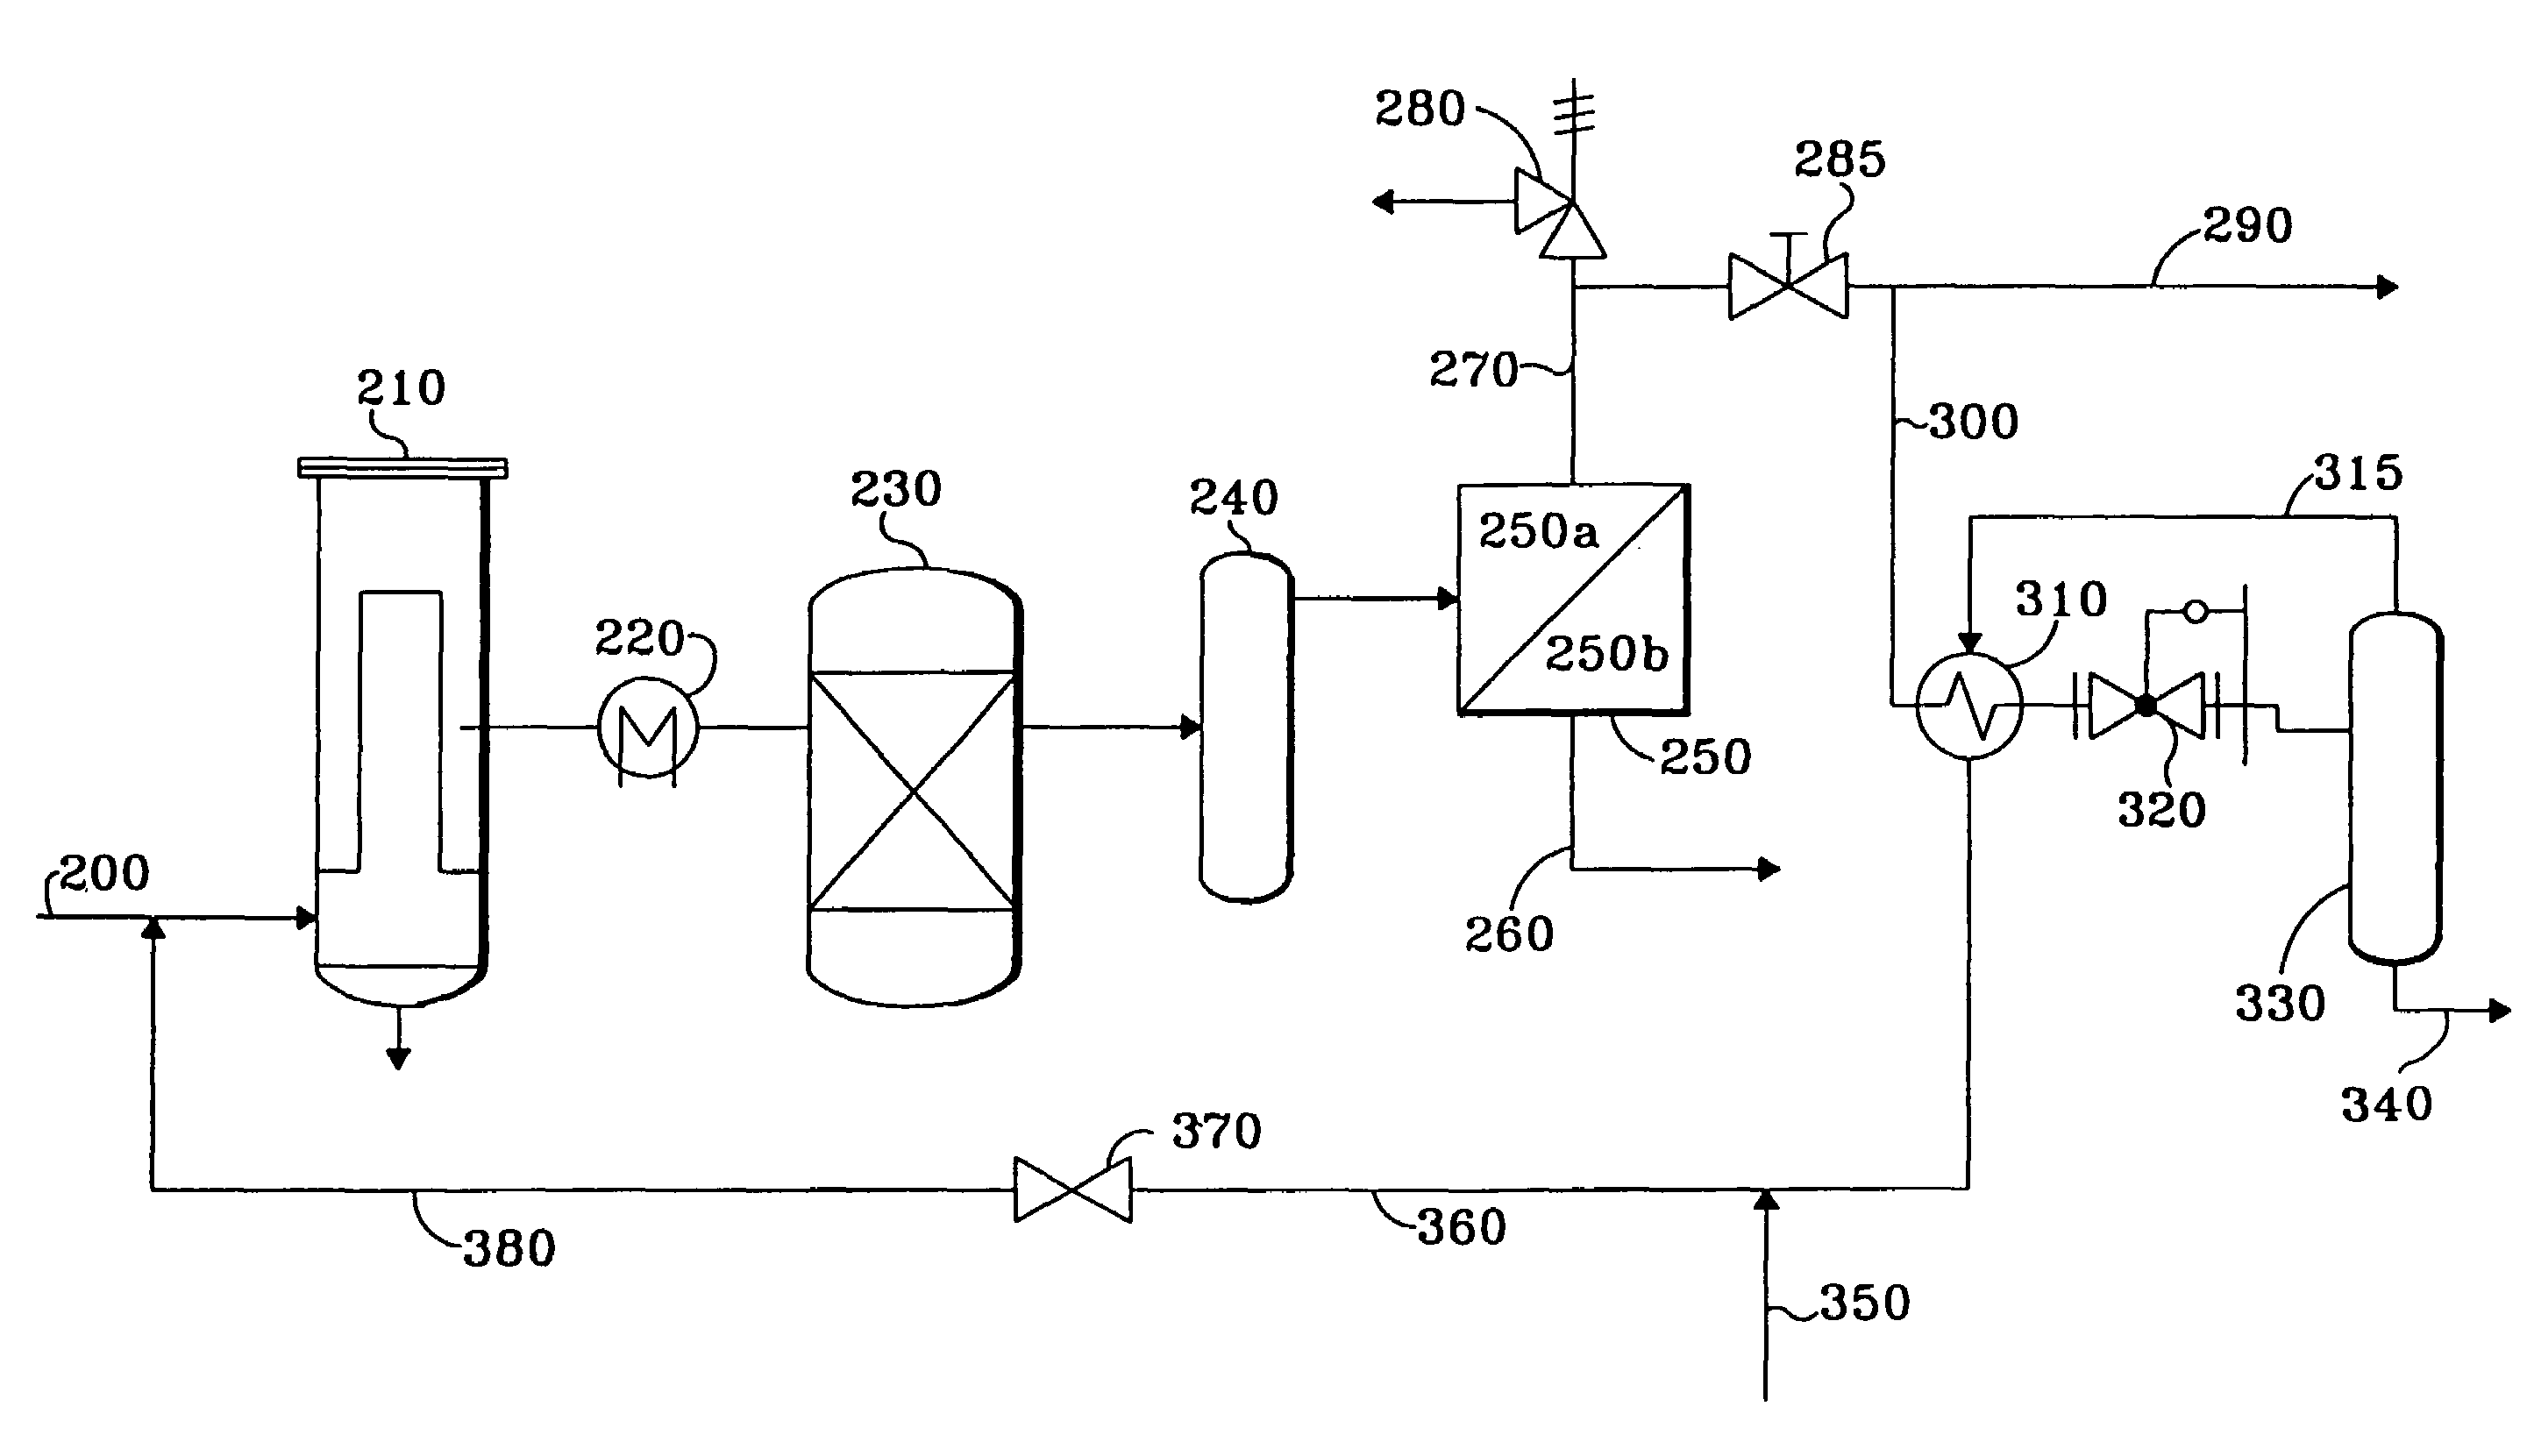 Process for safe membrane operation